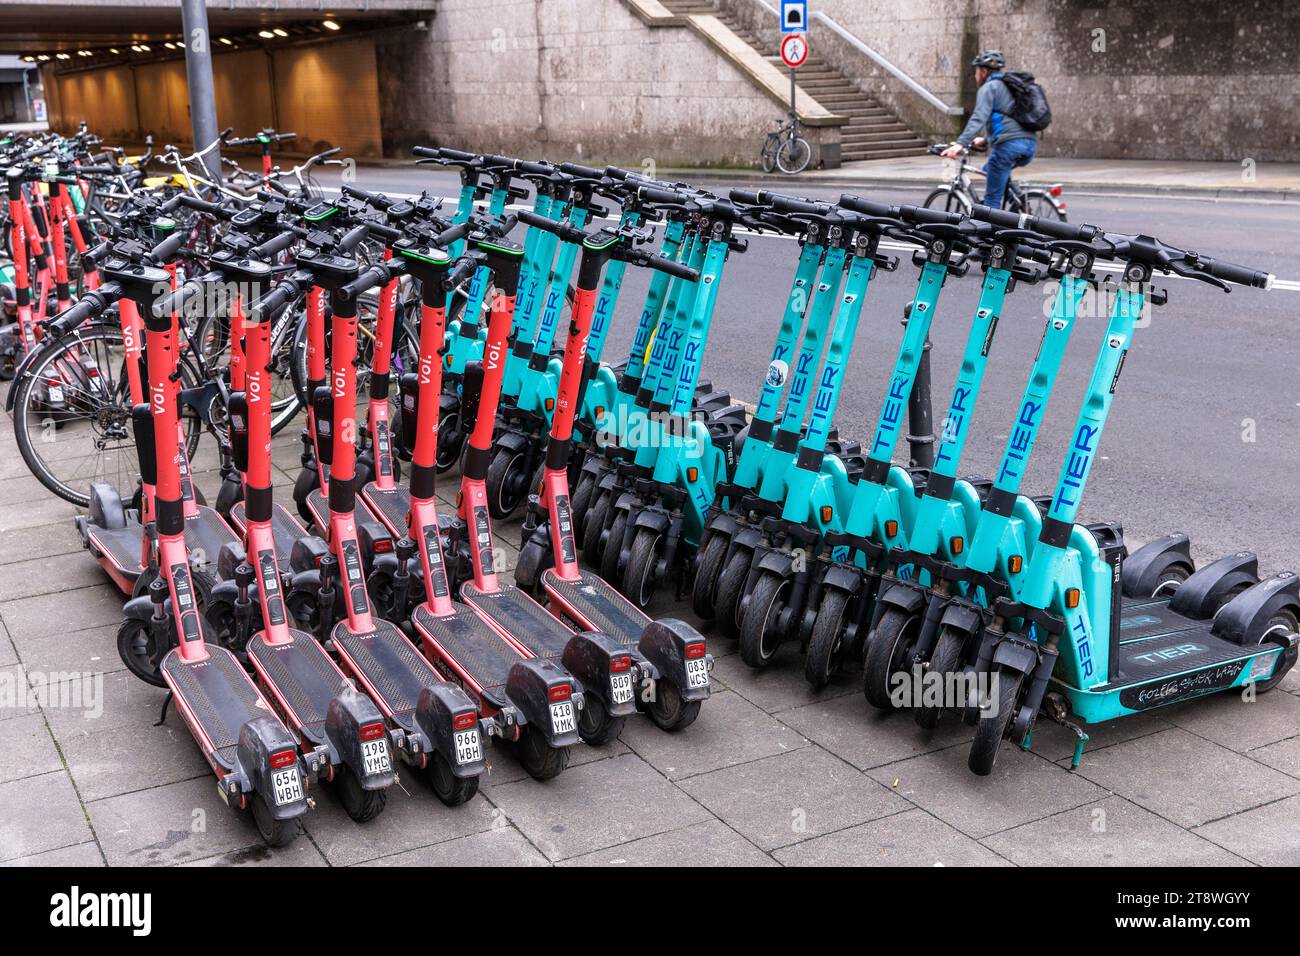 Tier and Voi electric scooters for rent are parked near the central station, Cologne, Germany. Tier und Voi Elektroscooter zum mieten stehen nahe Haup Stock Photo